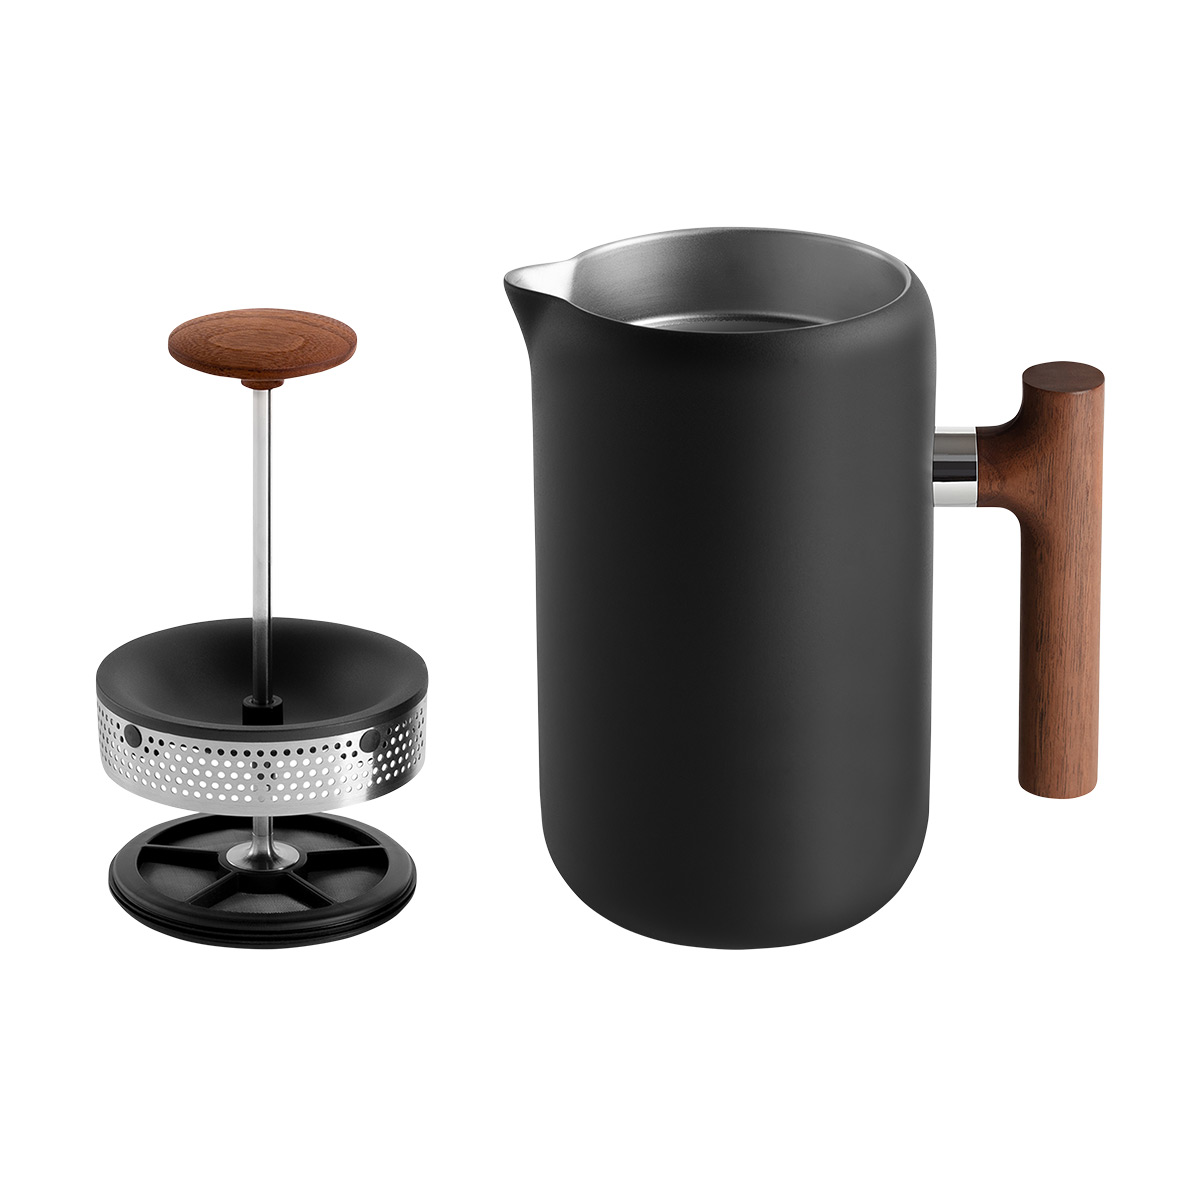 https://www.containerstore.com/catalogimages/490348/10094668-102120_FrenchPress-HeroImag.jpg